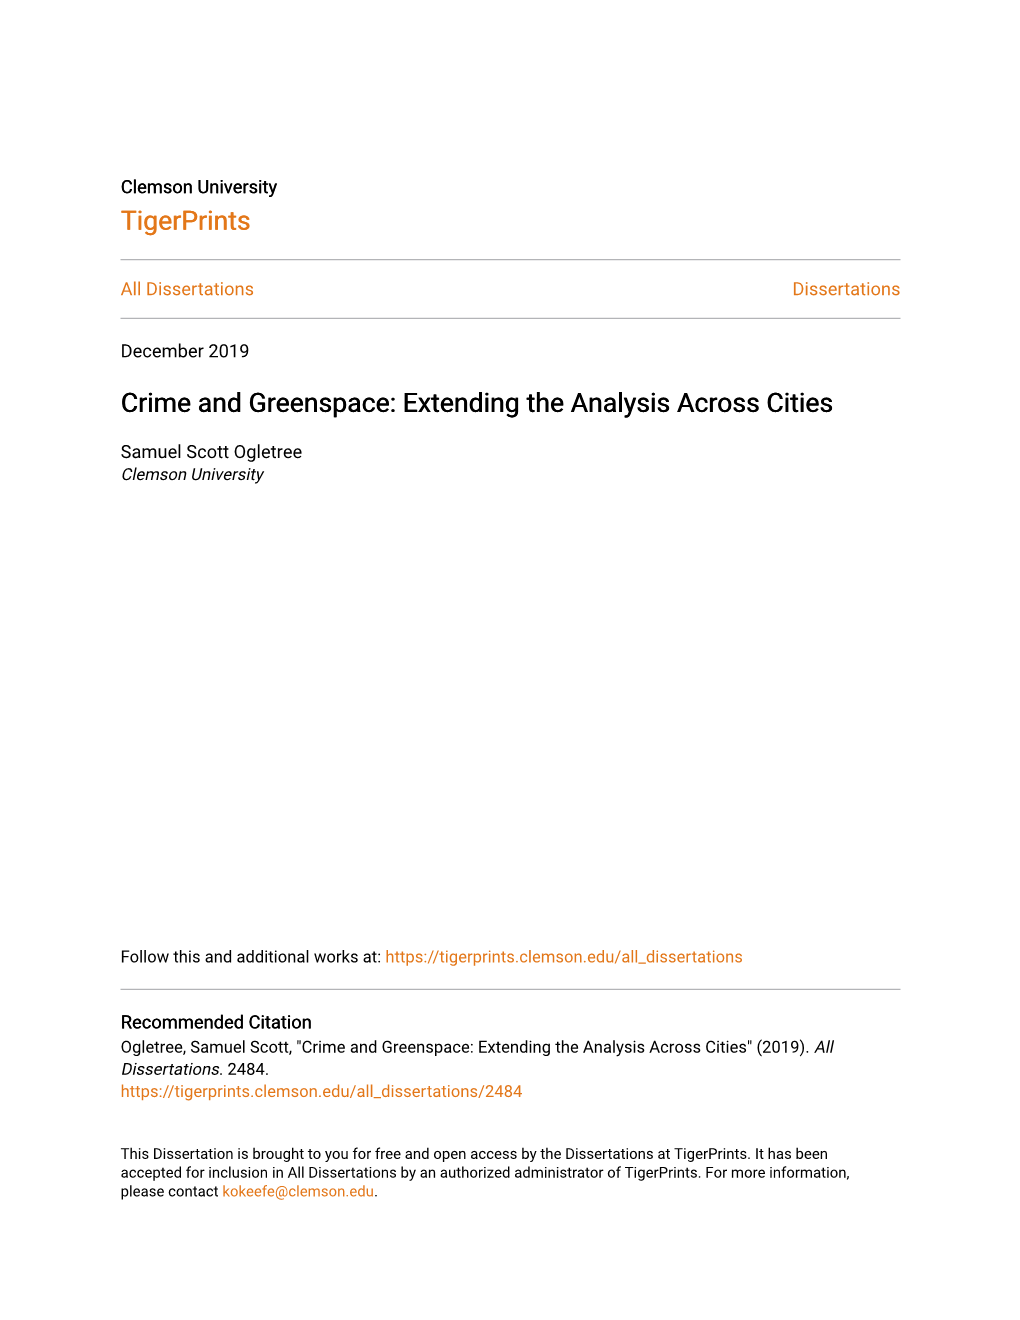 Crime and Greenspace: Extending the Analysis Across Cities